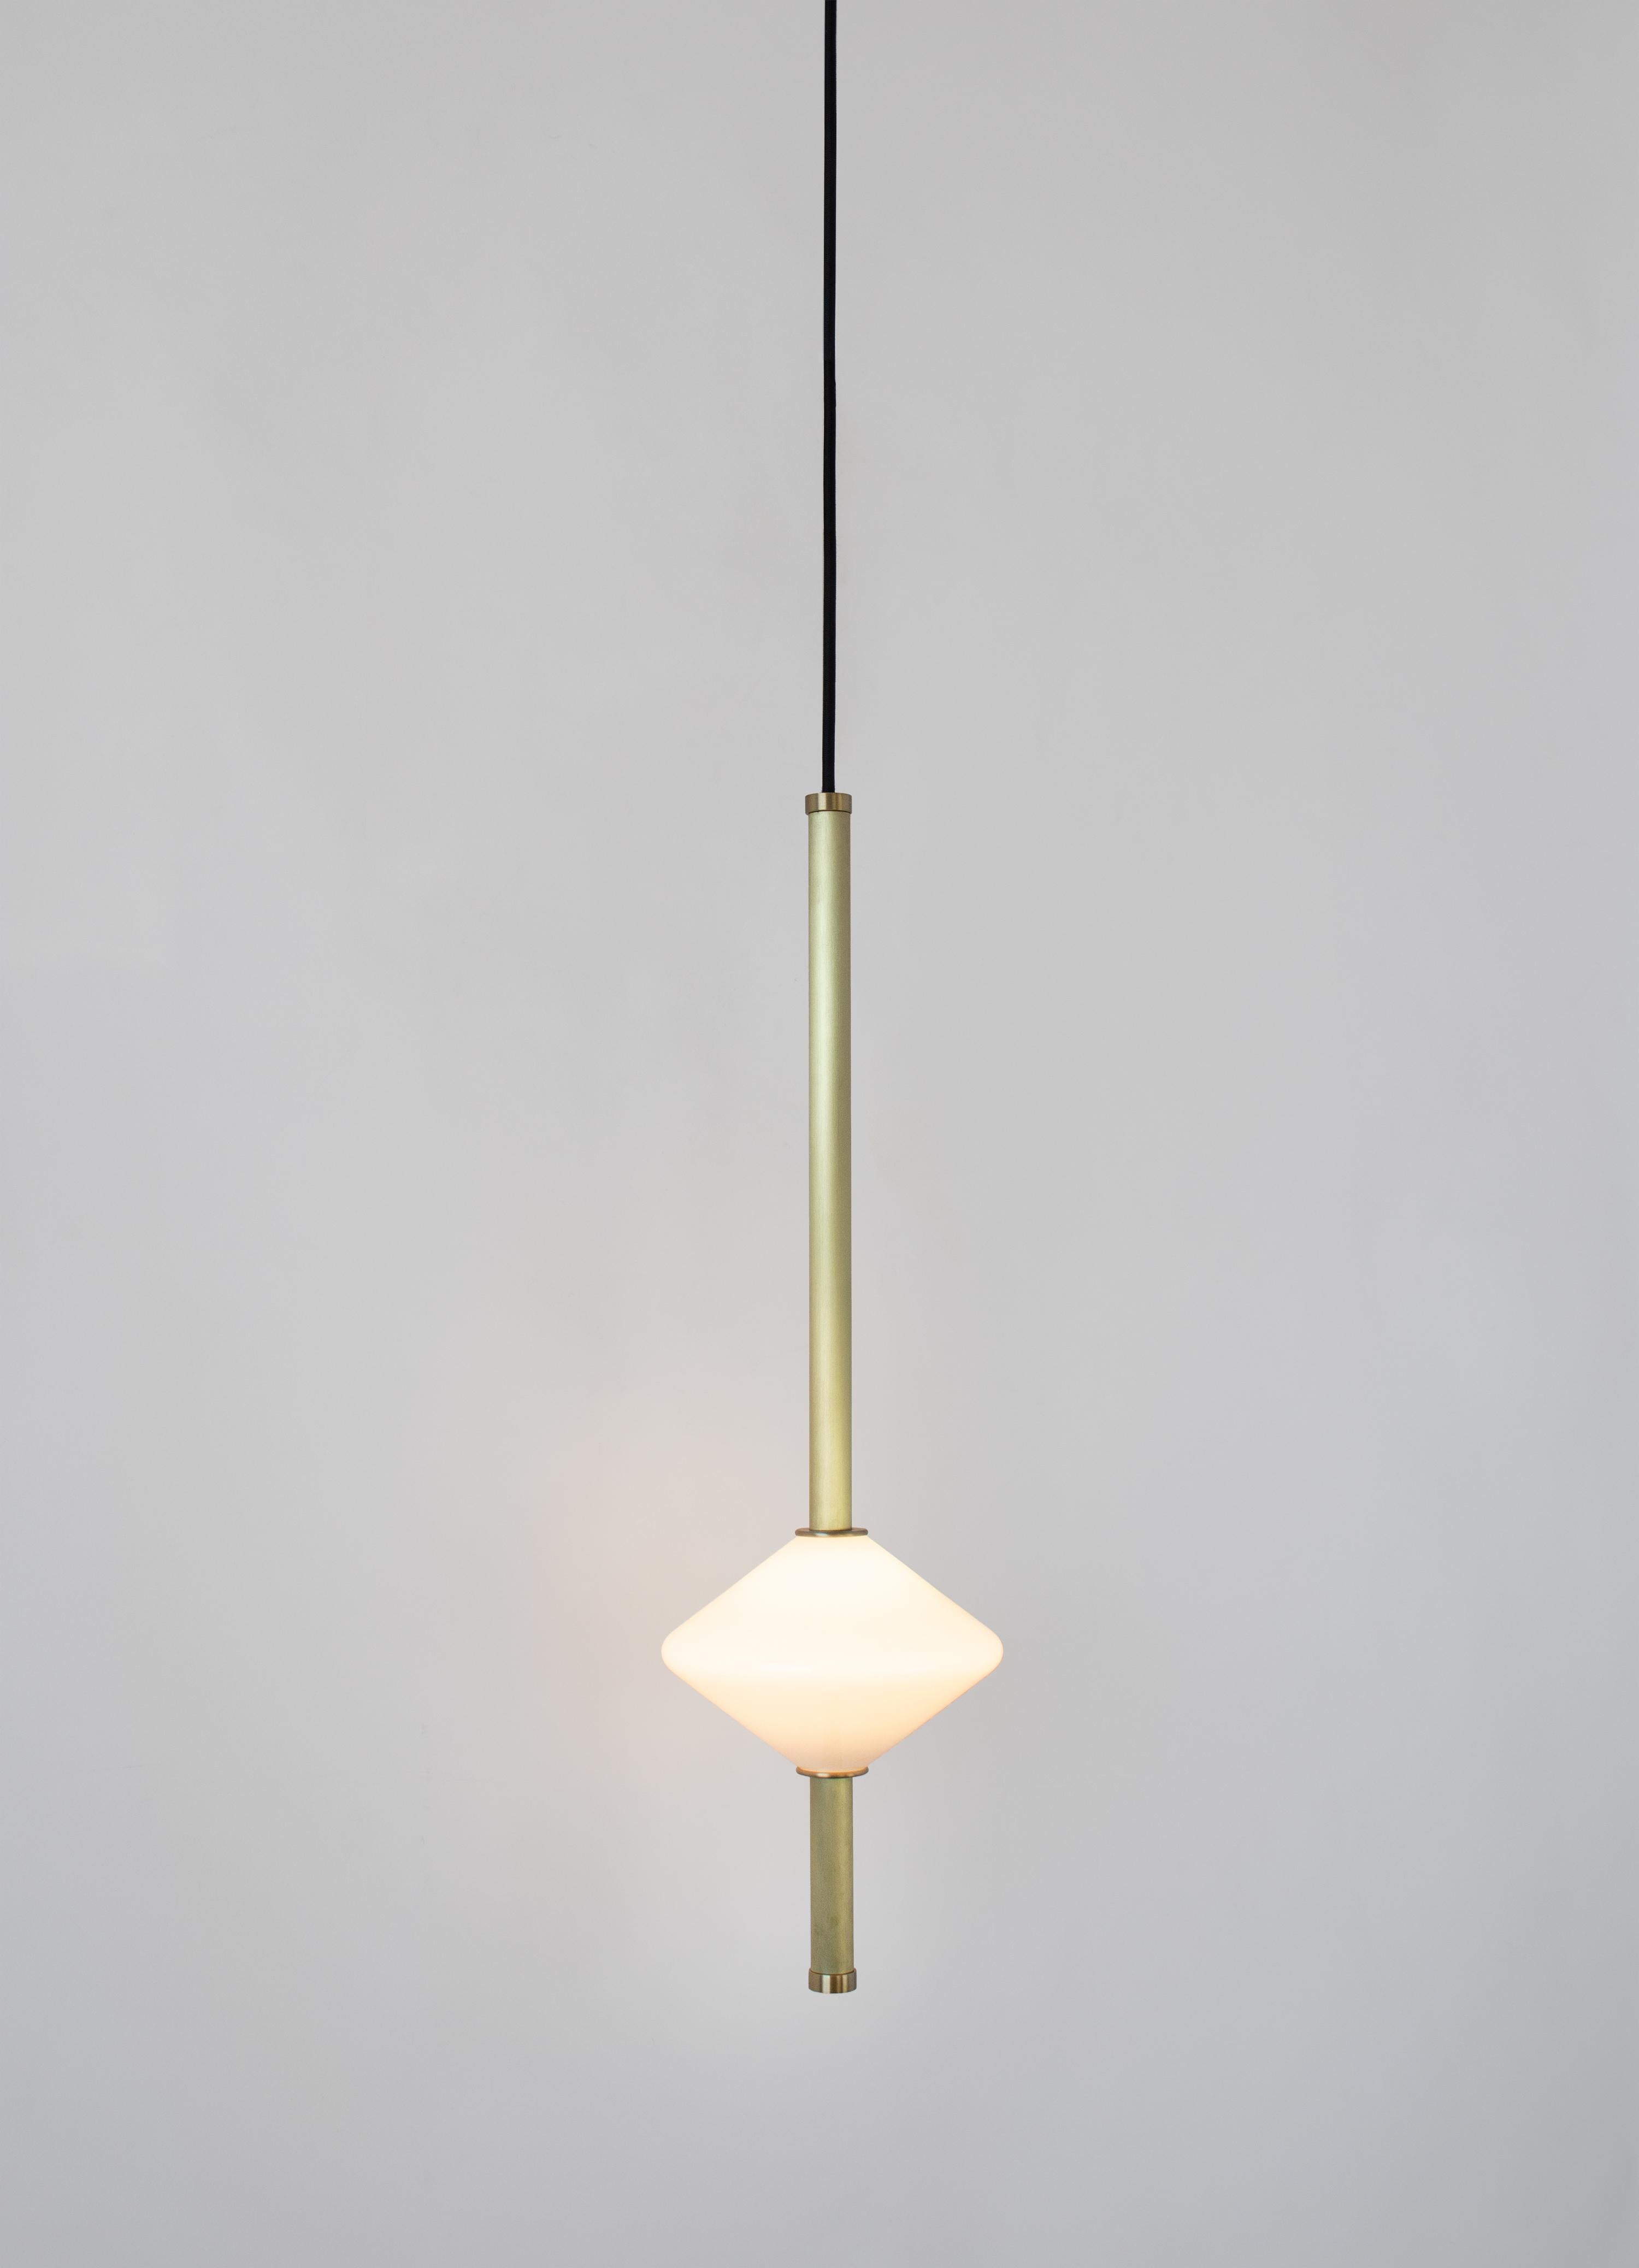 The GEM 1 Vertical Pendant is built of brass with an LED light source that is diffused by a hand-blown opal white glass diffuser. Each pendant is suspended from a black cord set with 5 inch diameter canopy. This pendant works as an individual